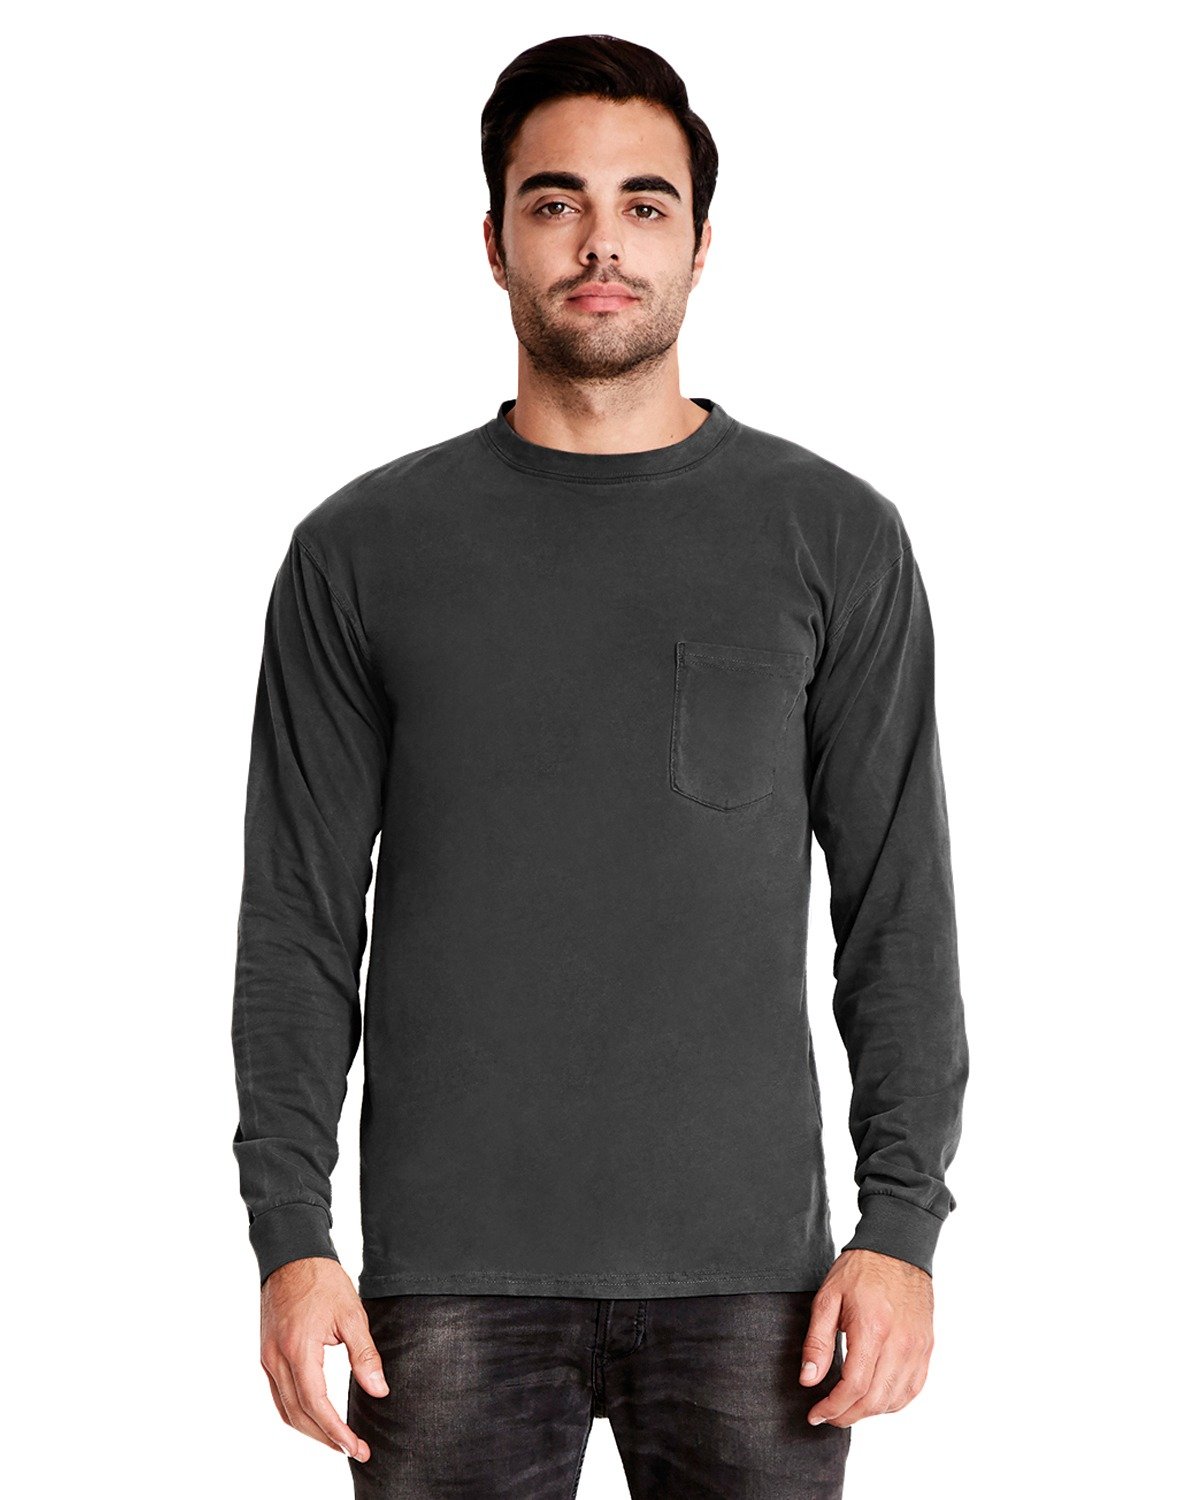 Next Level Apparel Adult Inspired Dye Long-Sleeve Crew with Pocket SHADOW 